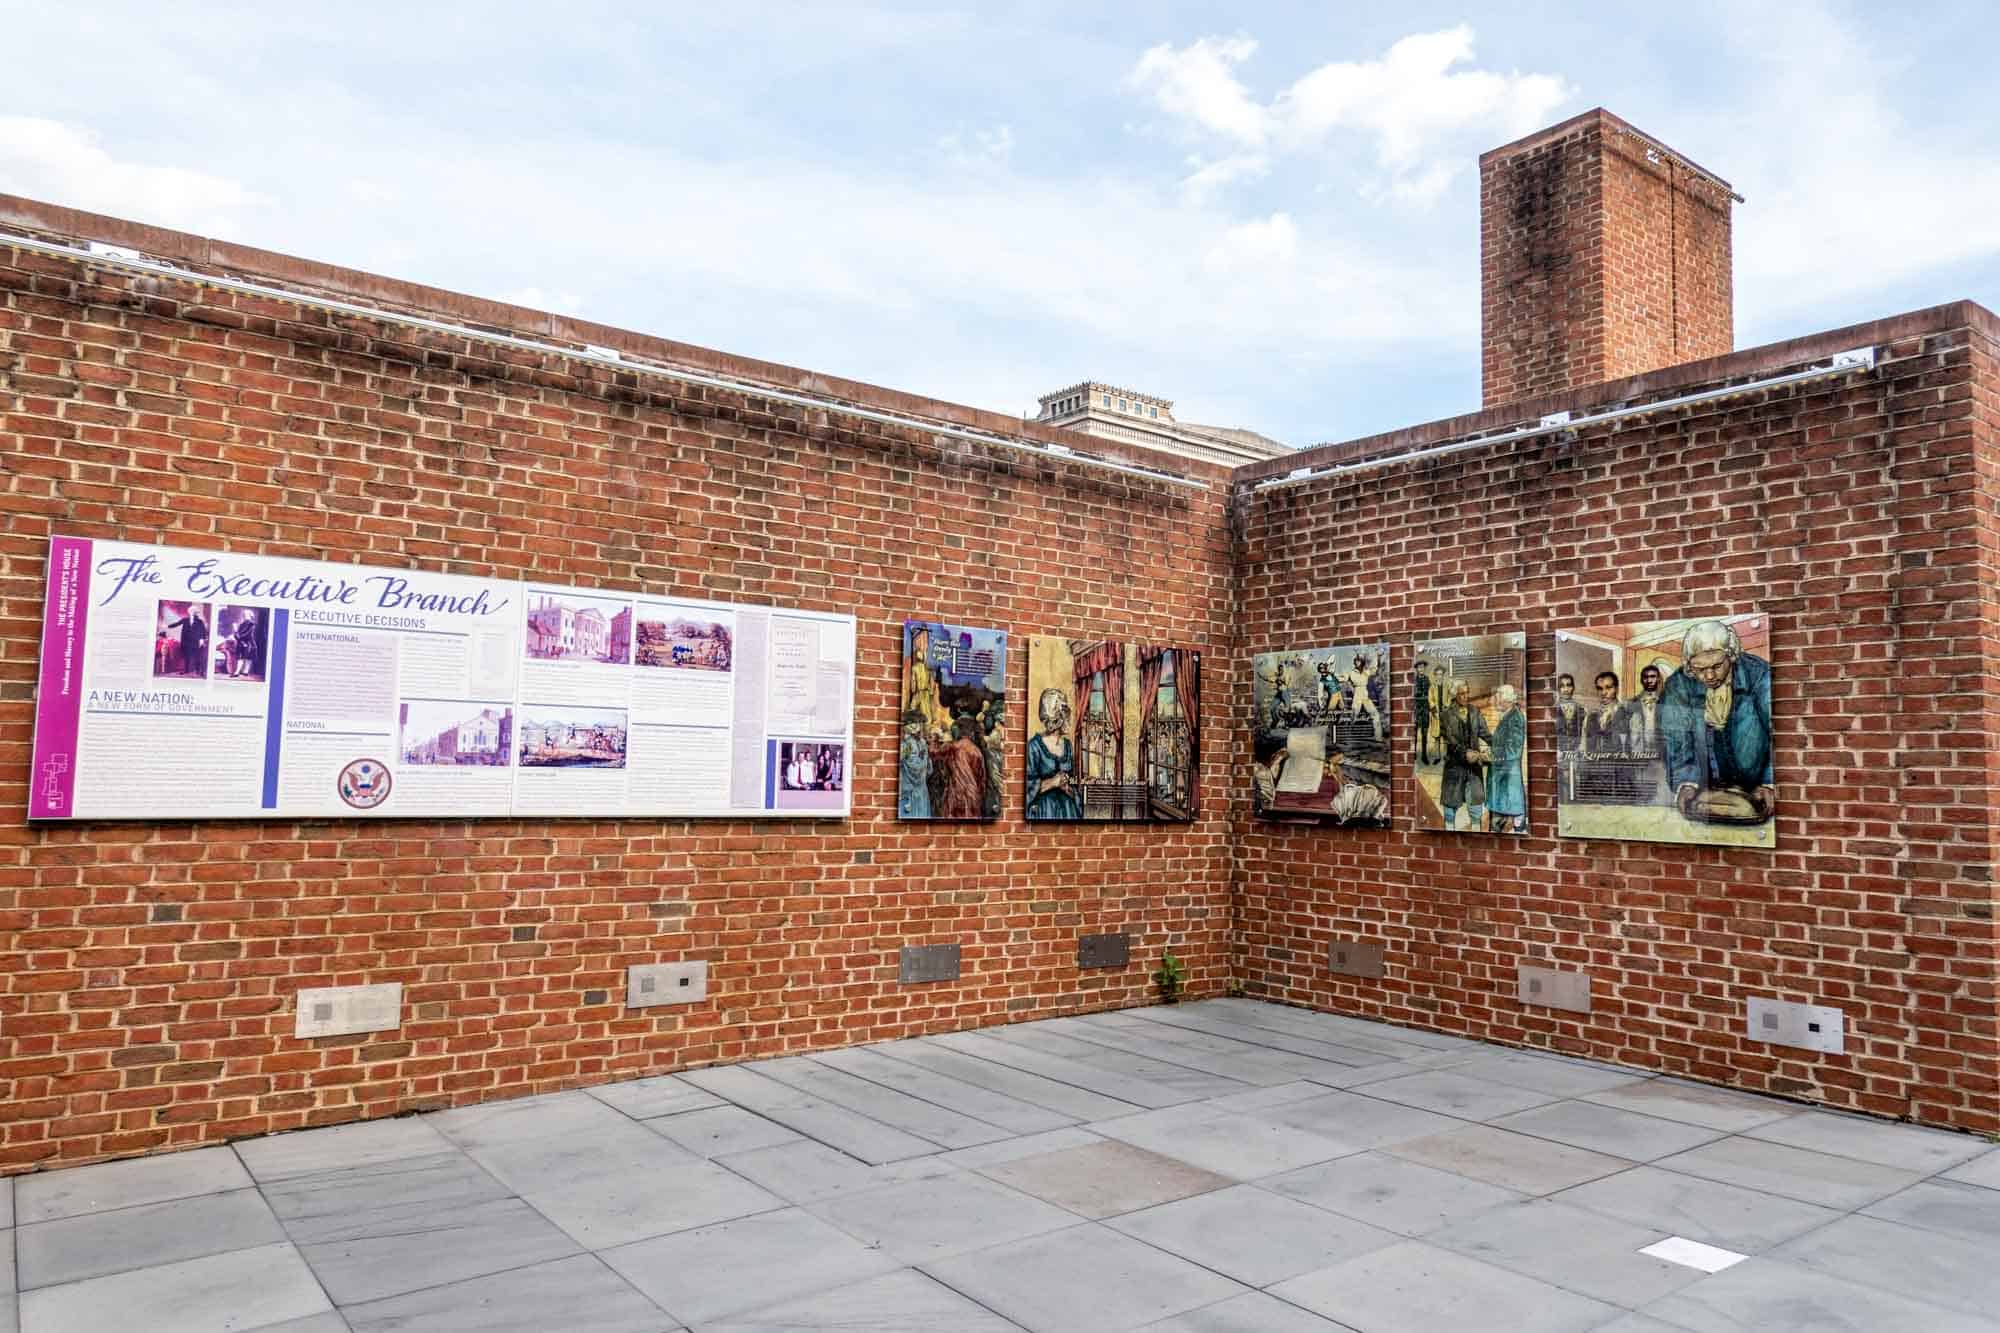 Open-air exhibit including information panels on a brick wall